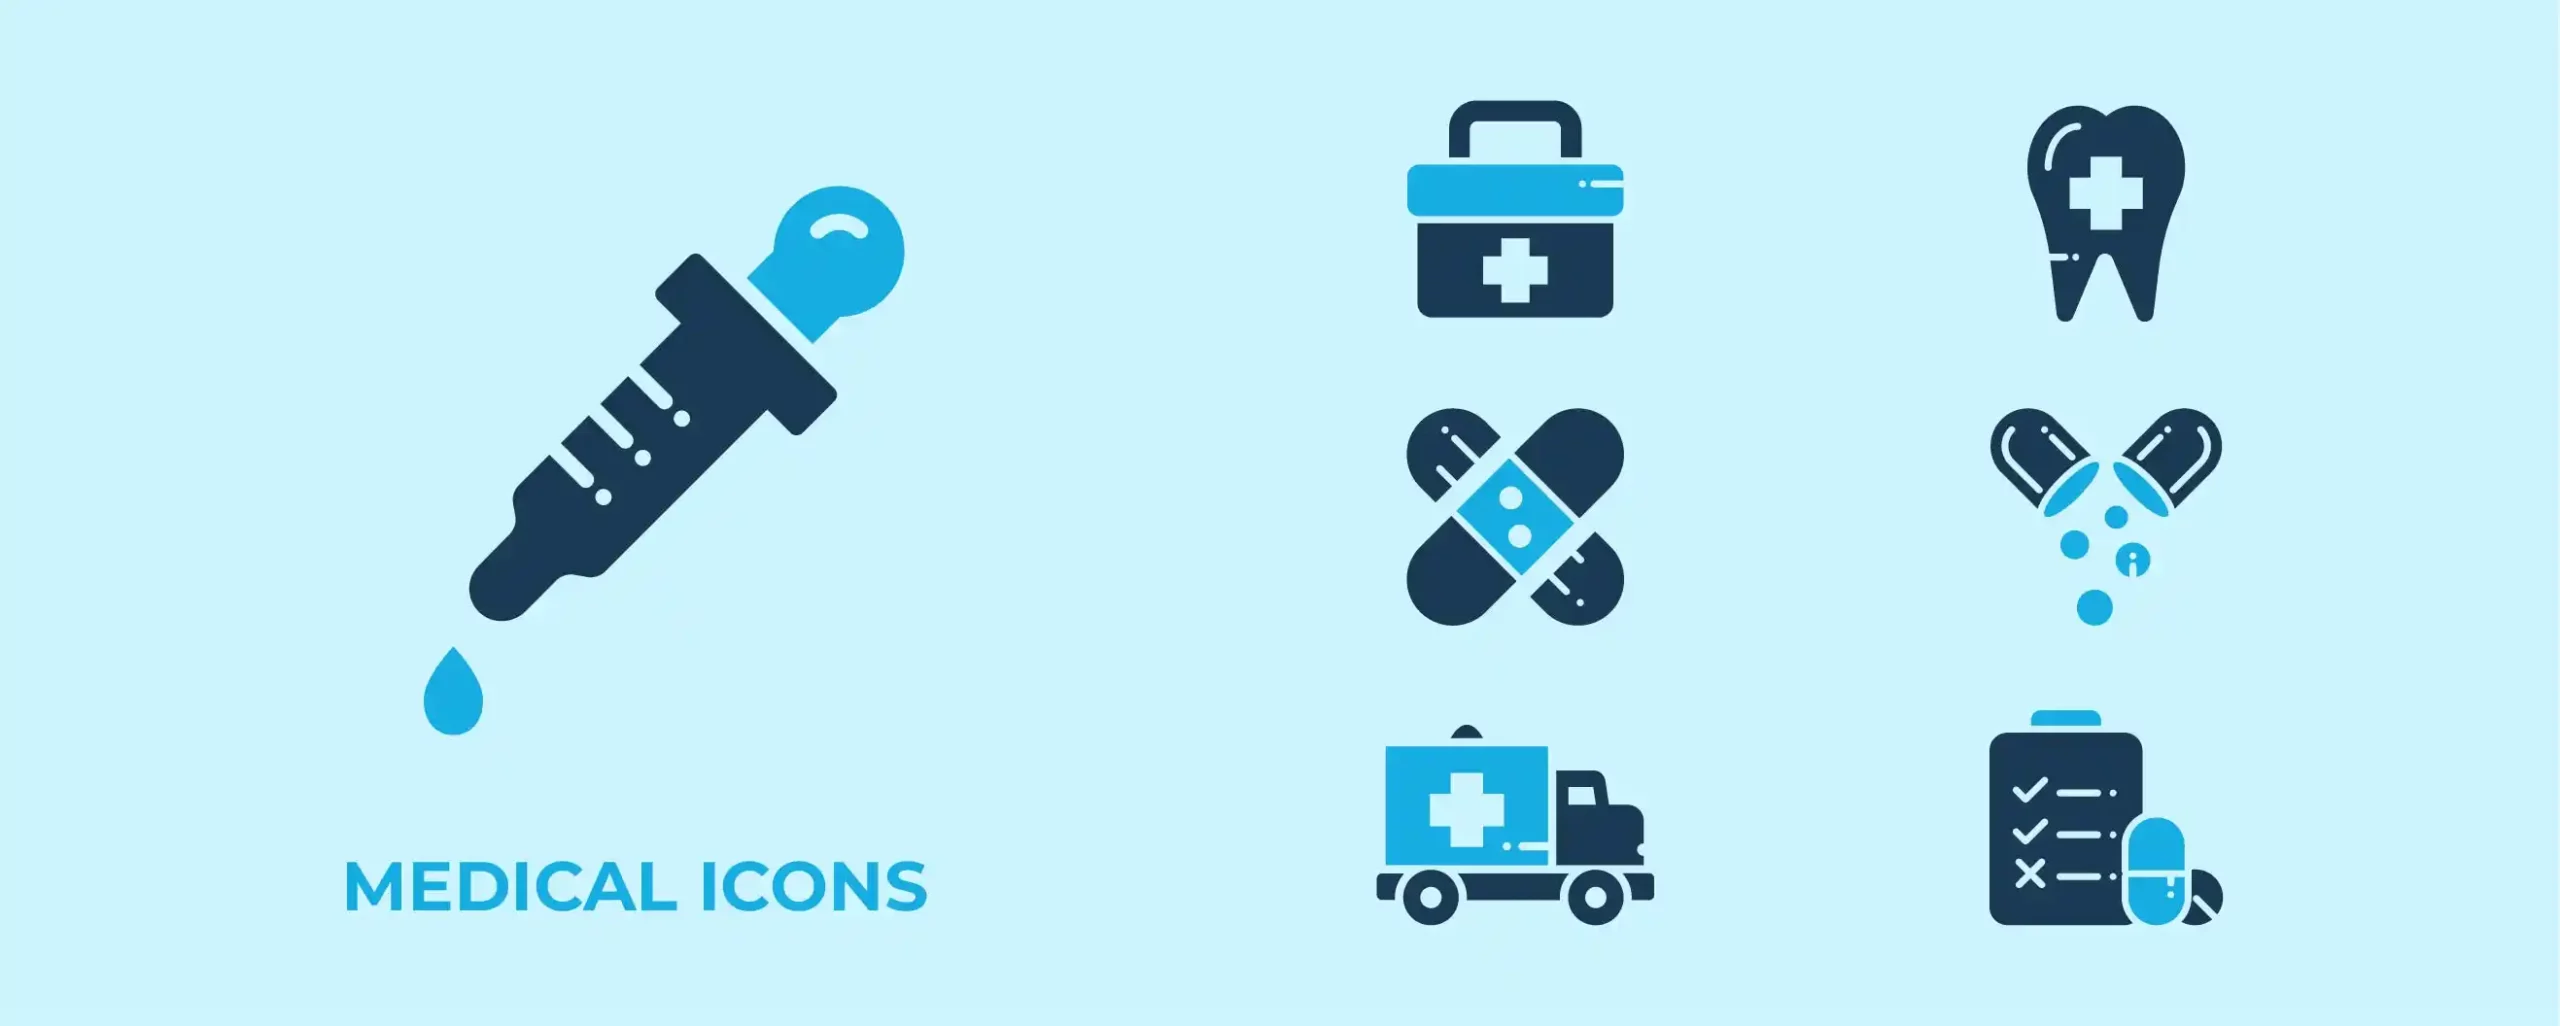 Free Medical icons 